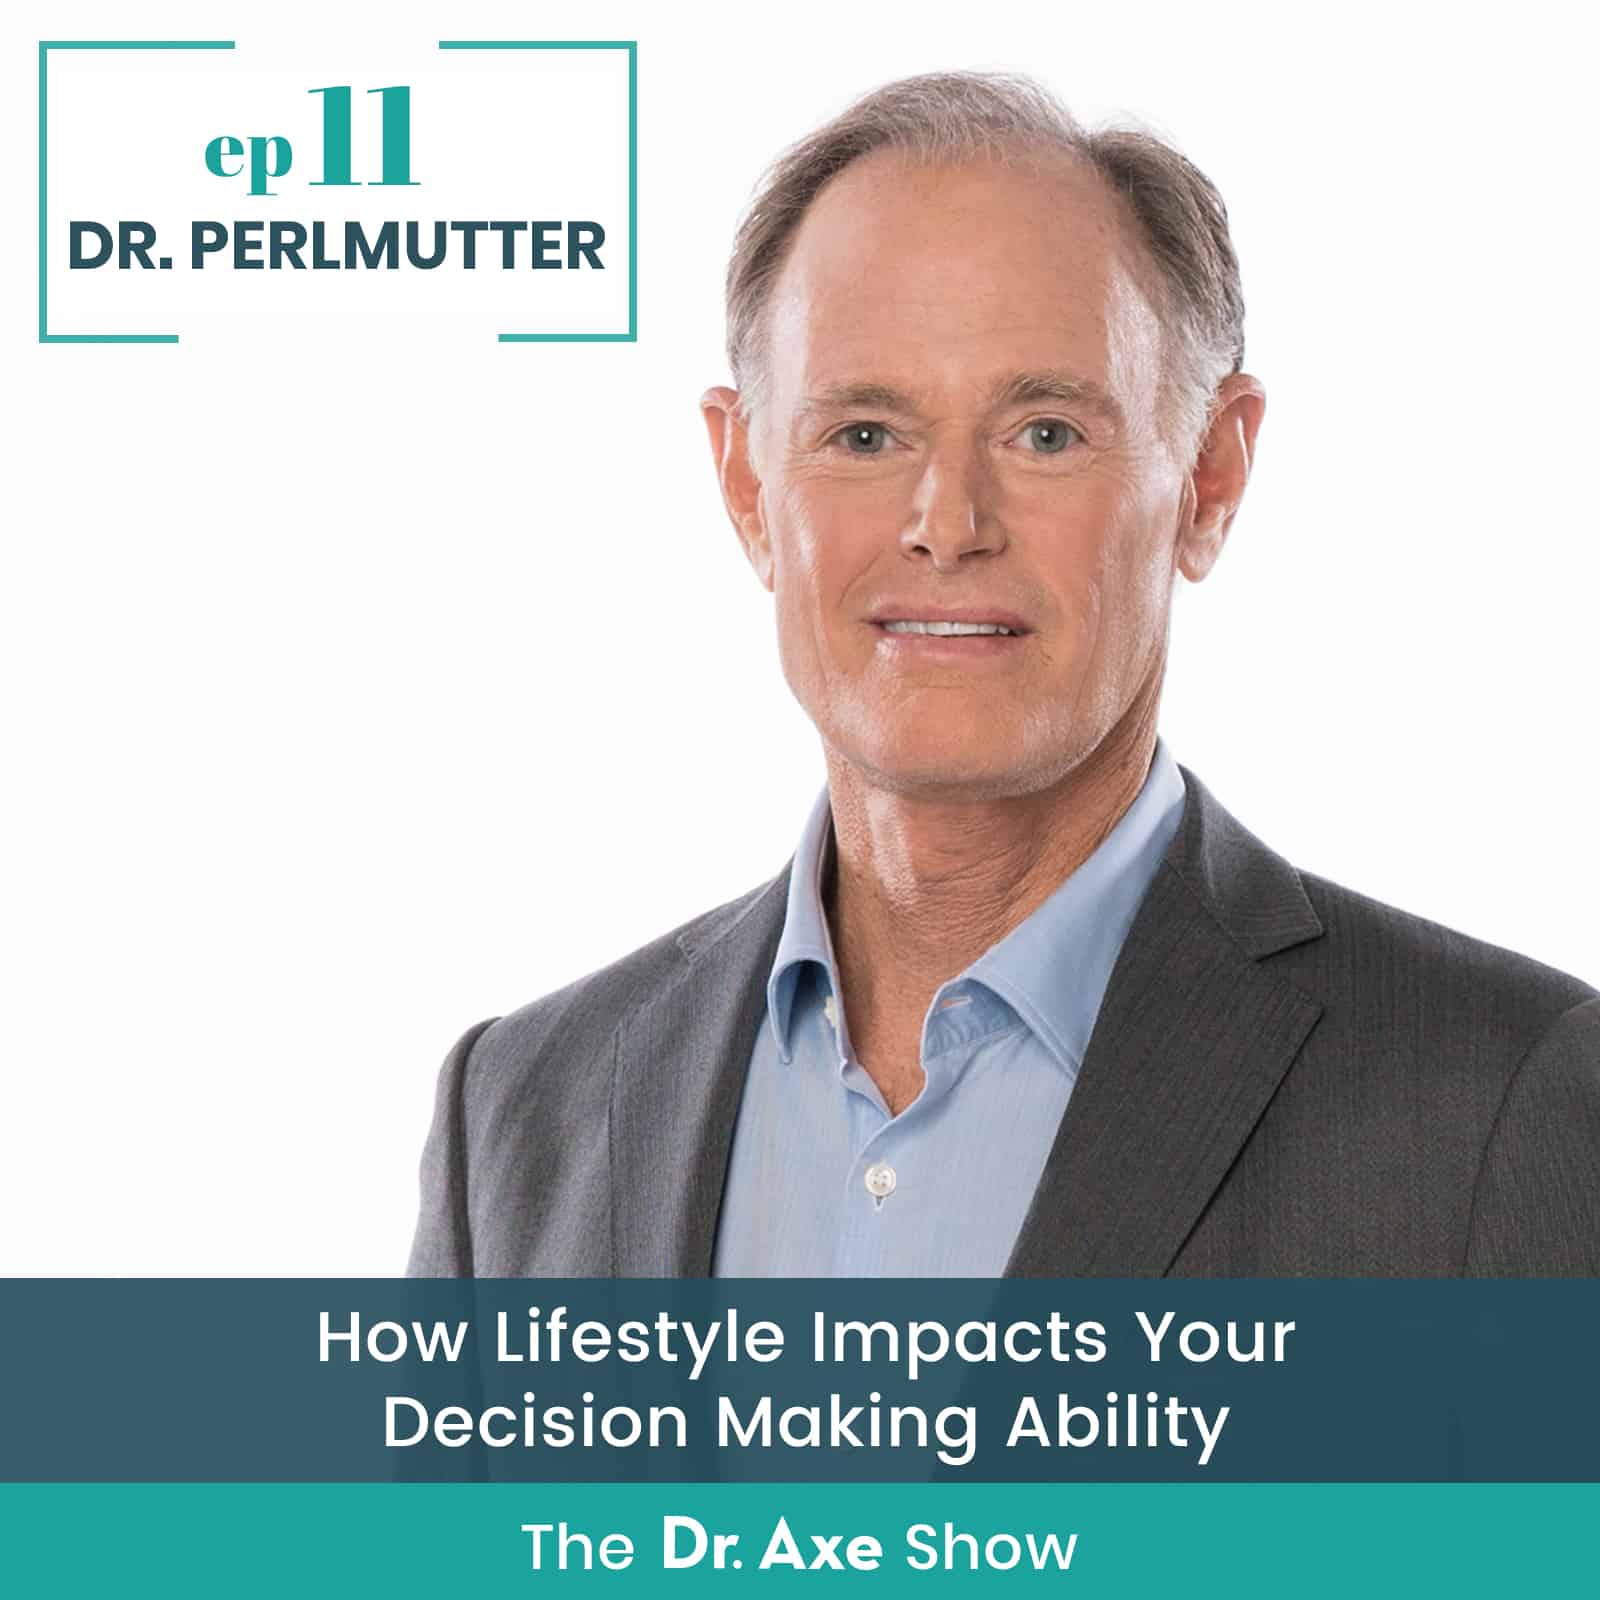 Episode Eleven: How Lifestyle Impacts Your Decision Making Ability